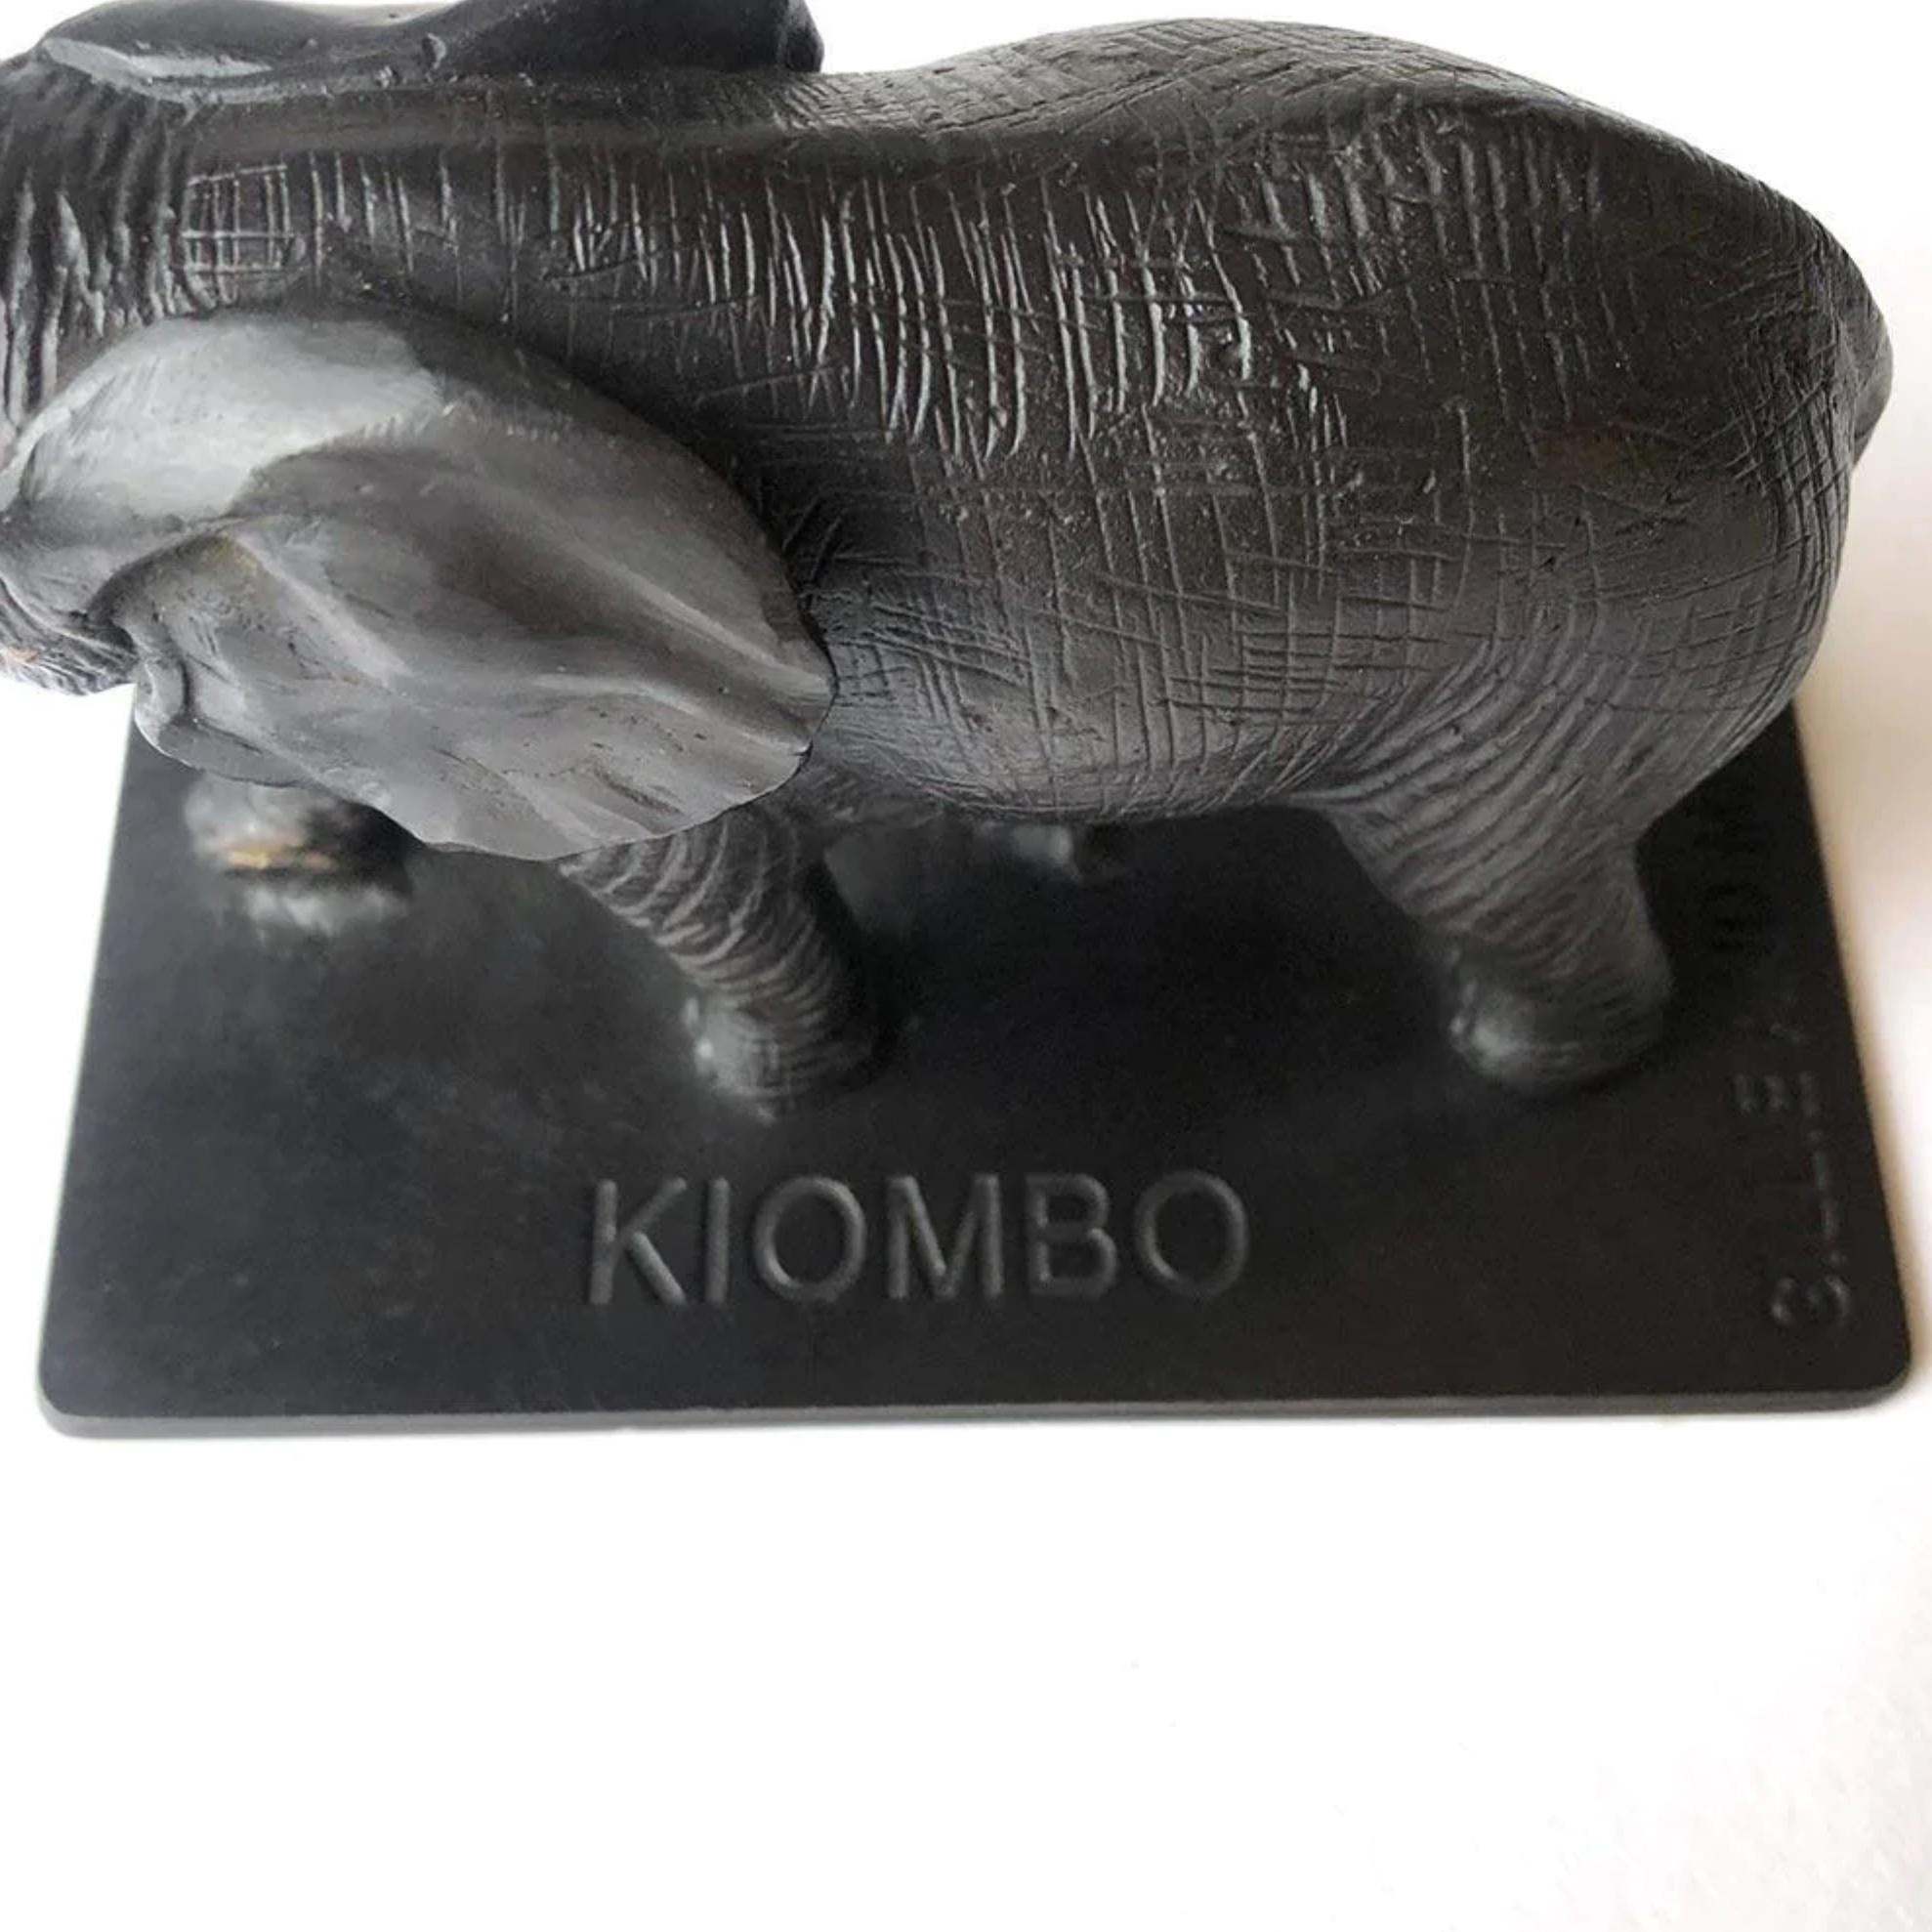 Authentic Bronze Orphan Kiombo Elephant Sculpture by Gillie and Marc For Sale 4